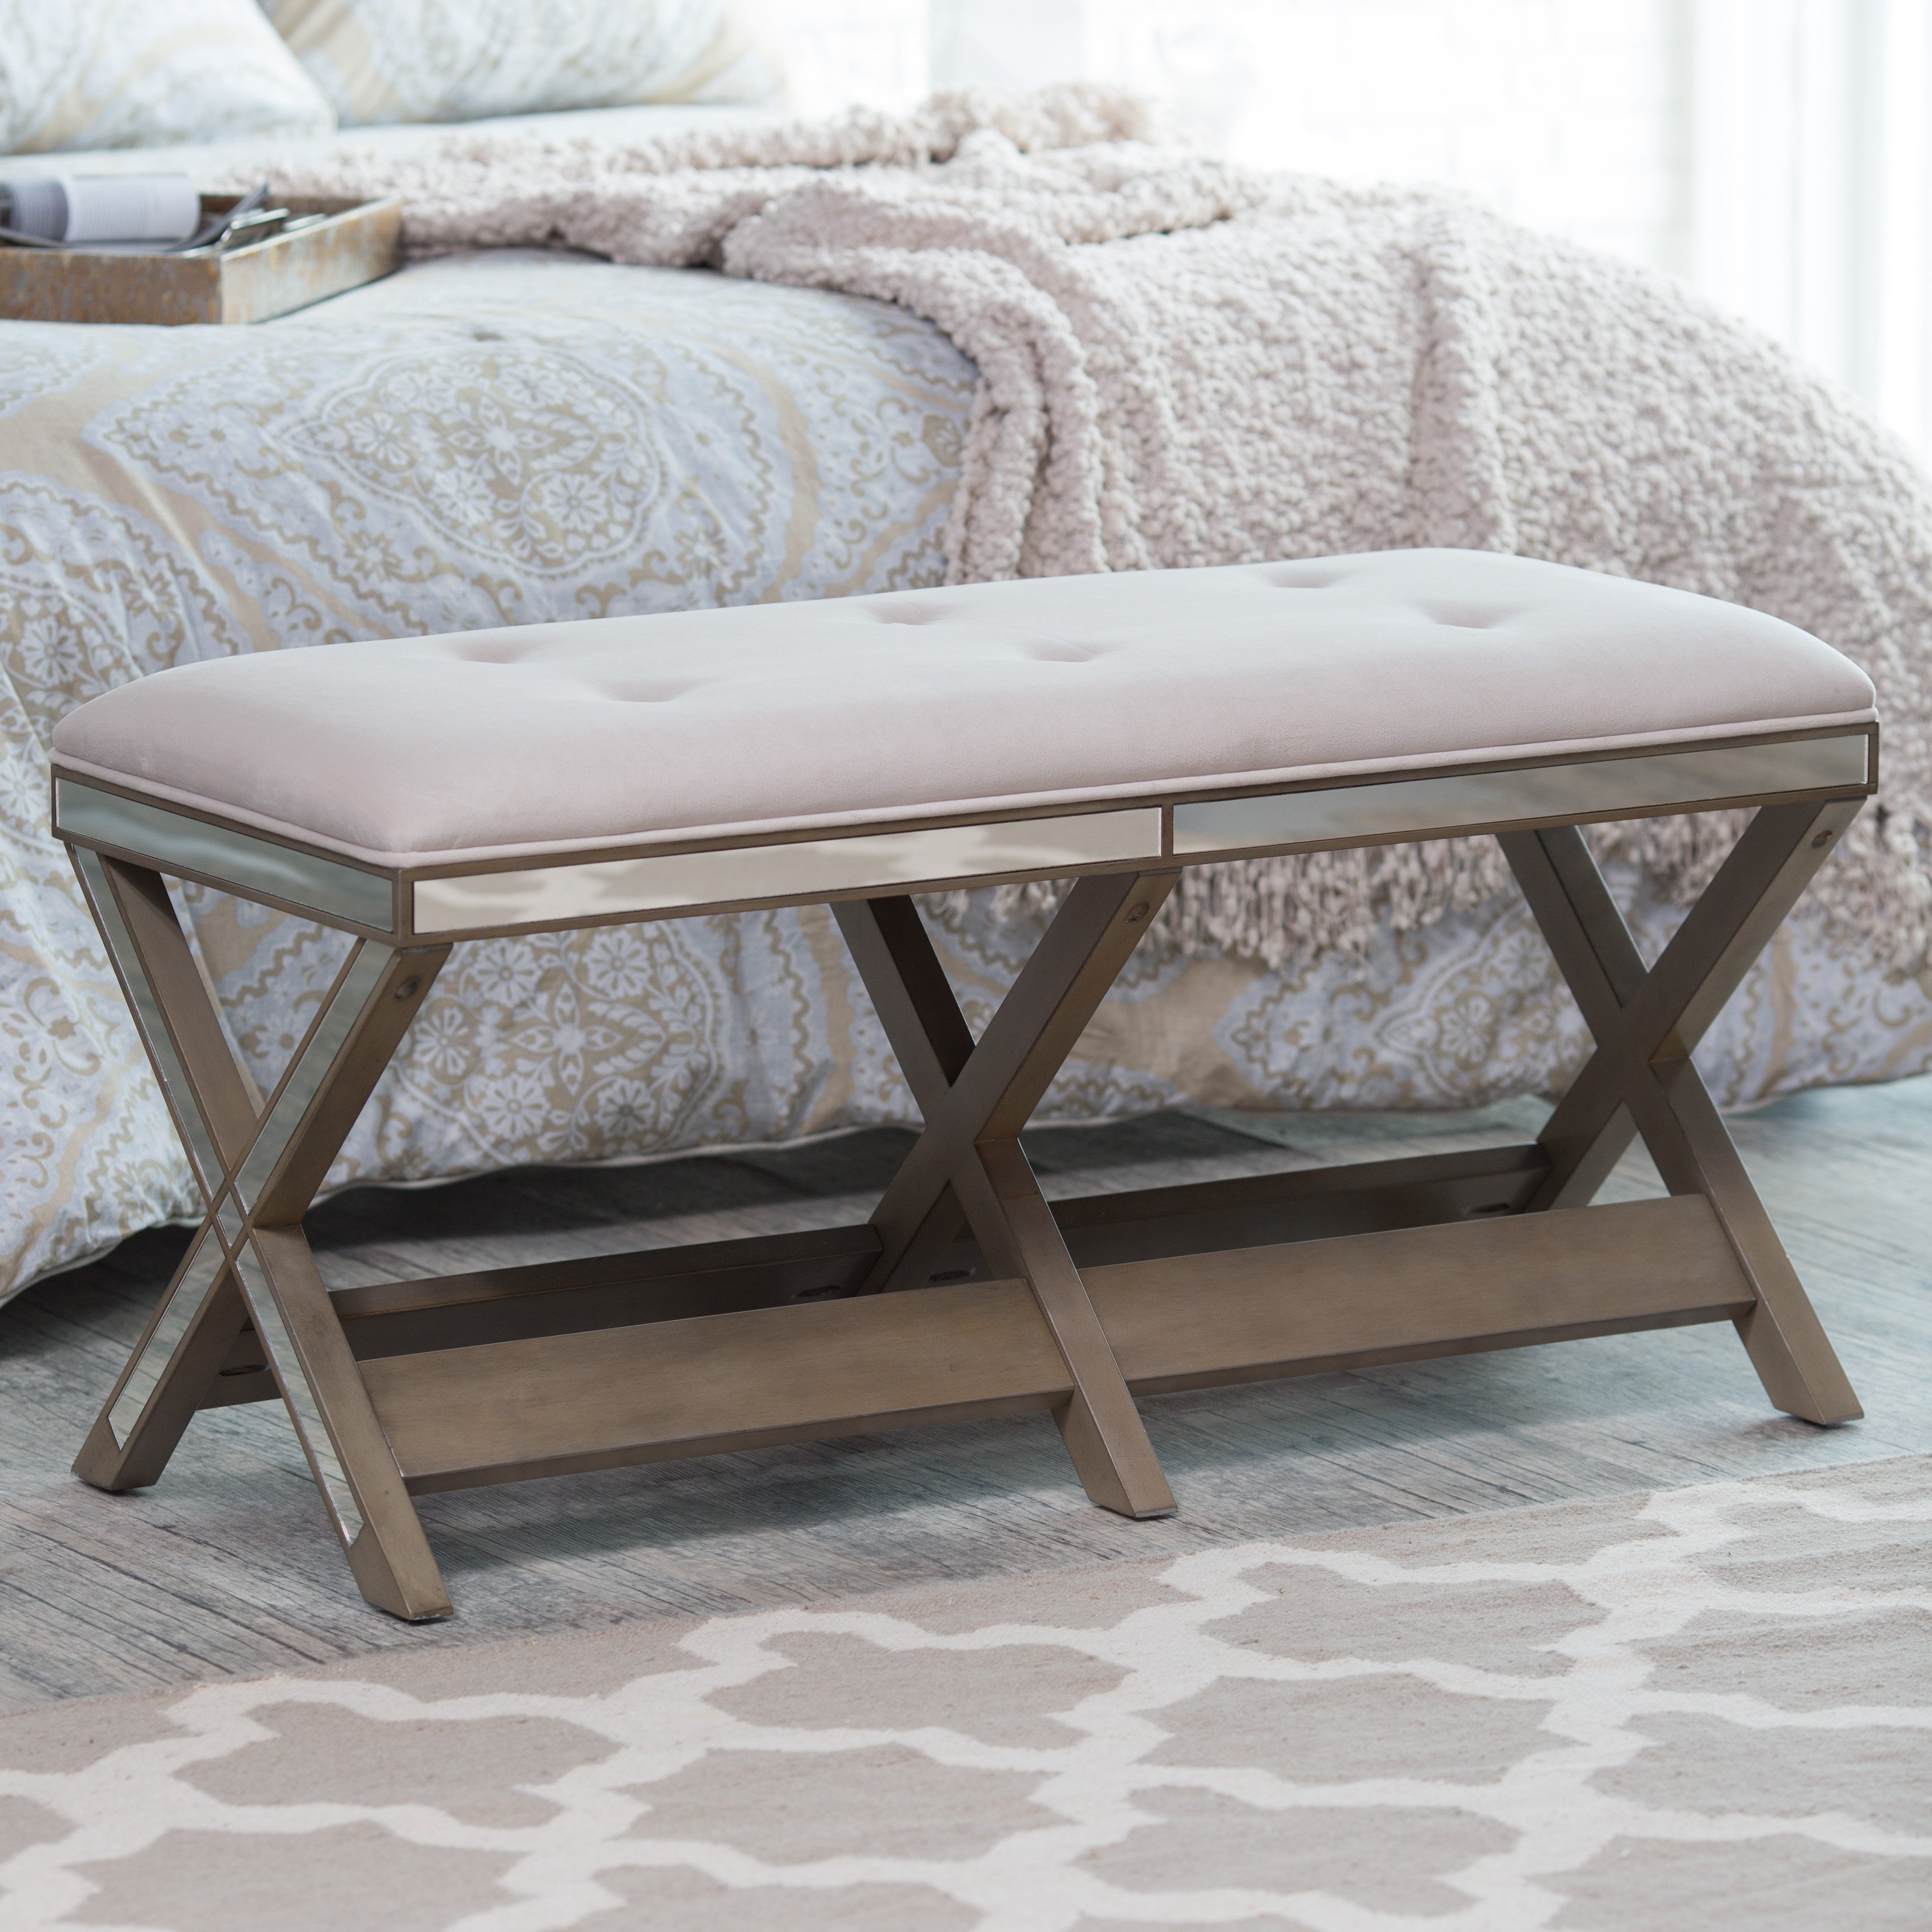 How To Incorporate A Bedroom Upholstered Bench In Your Decor